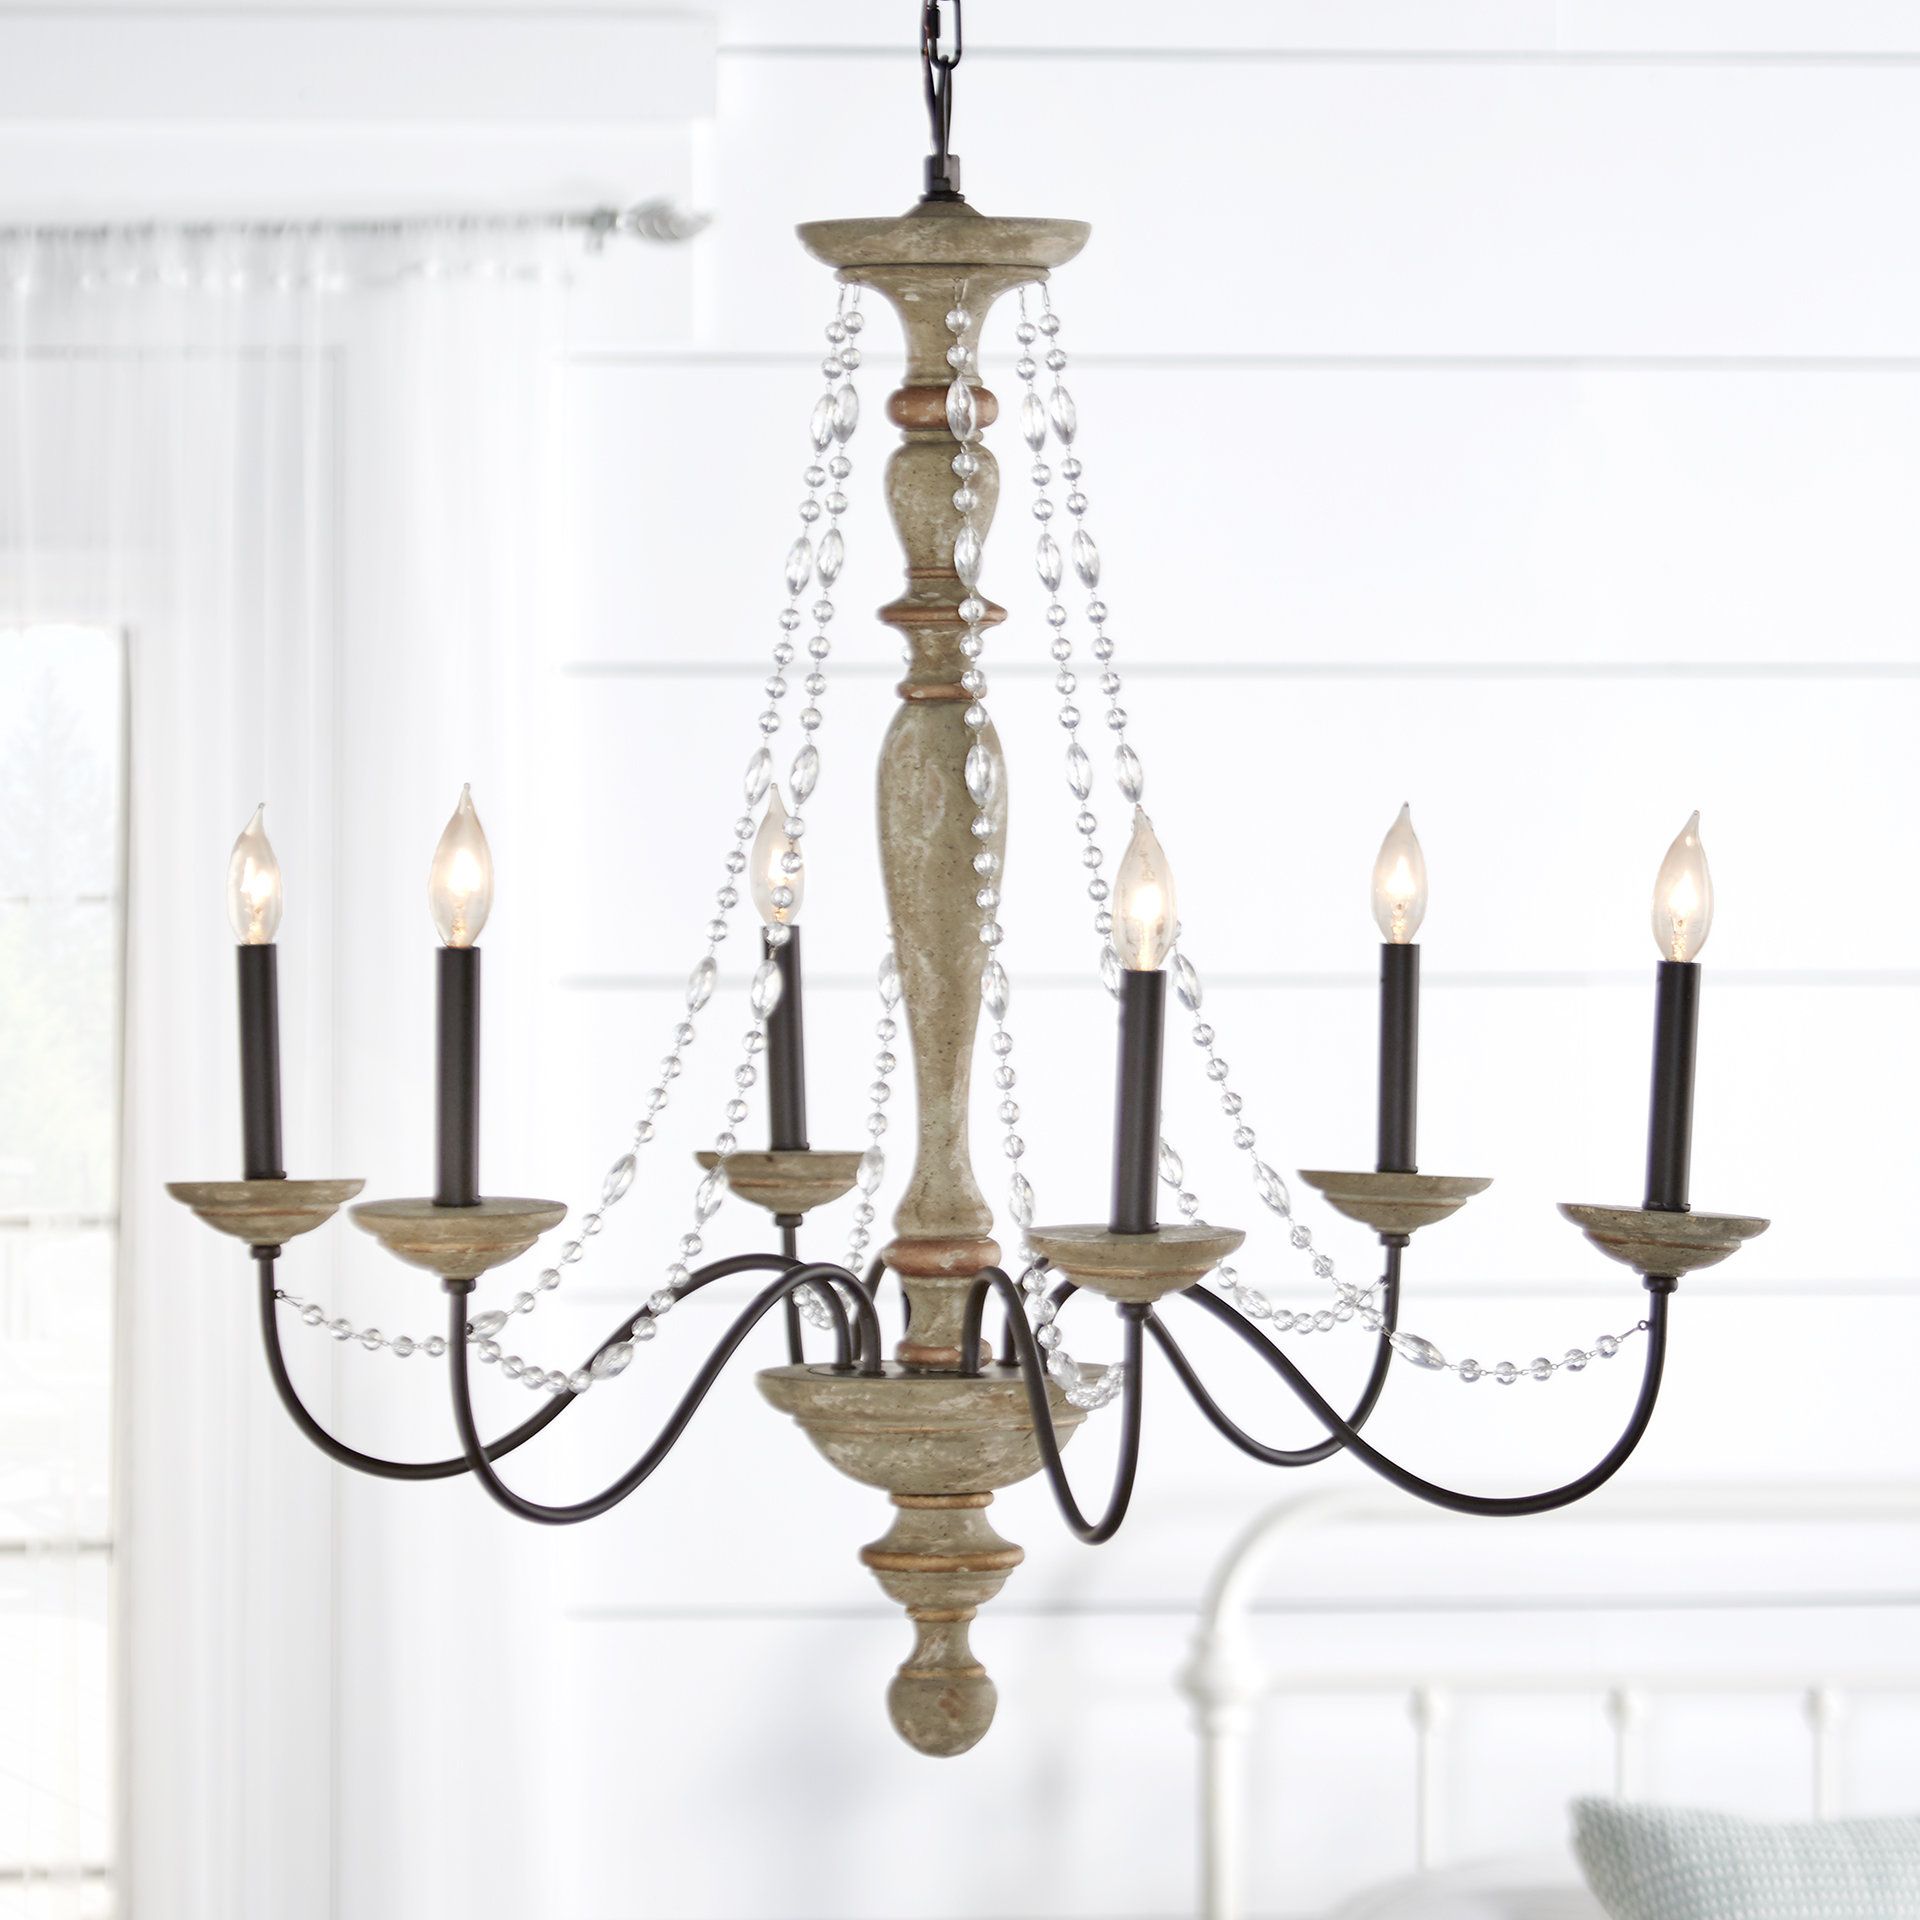 Three Posts Brennon 6 Light Candle Style Chandelier Intended For Fashionable Hamza 6 Light Candle Style Chandeliers (View 5 of 25)